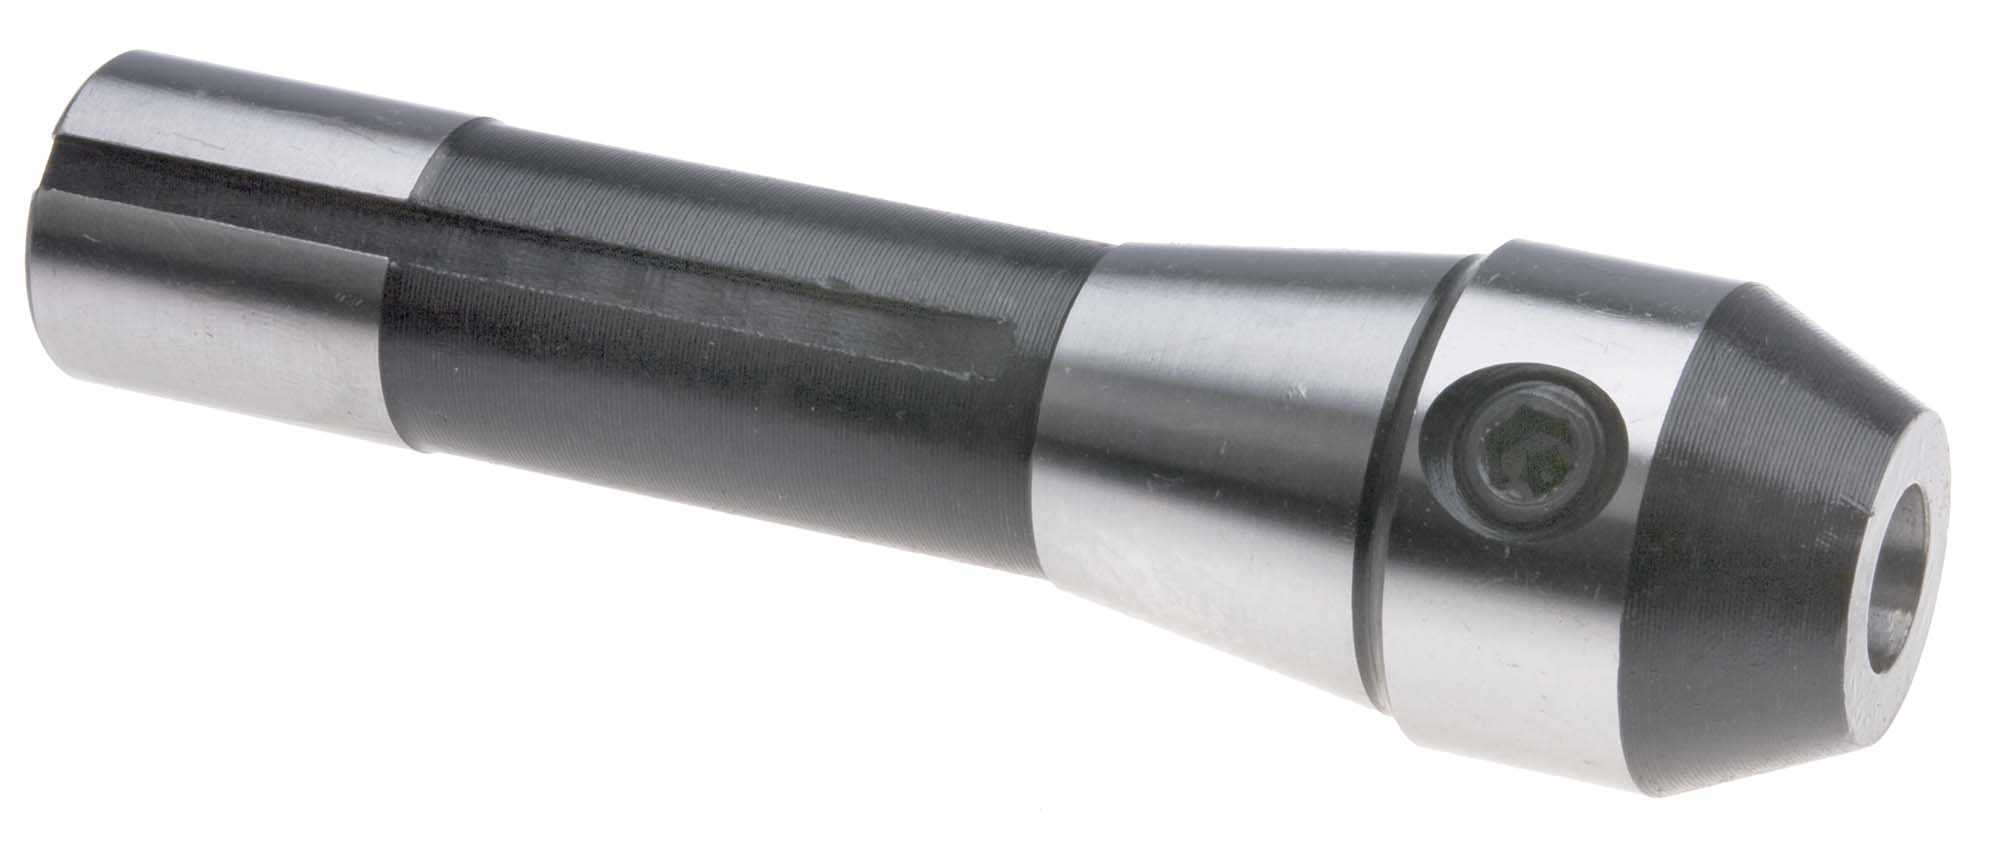 3/4" R8 End Mill Adapter